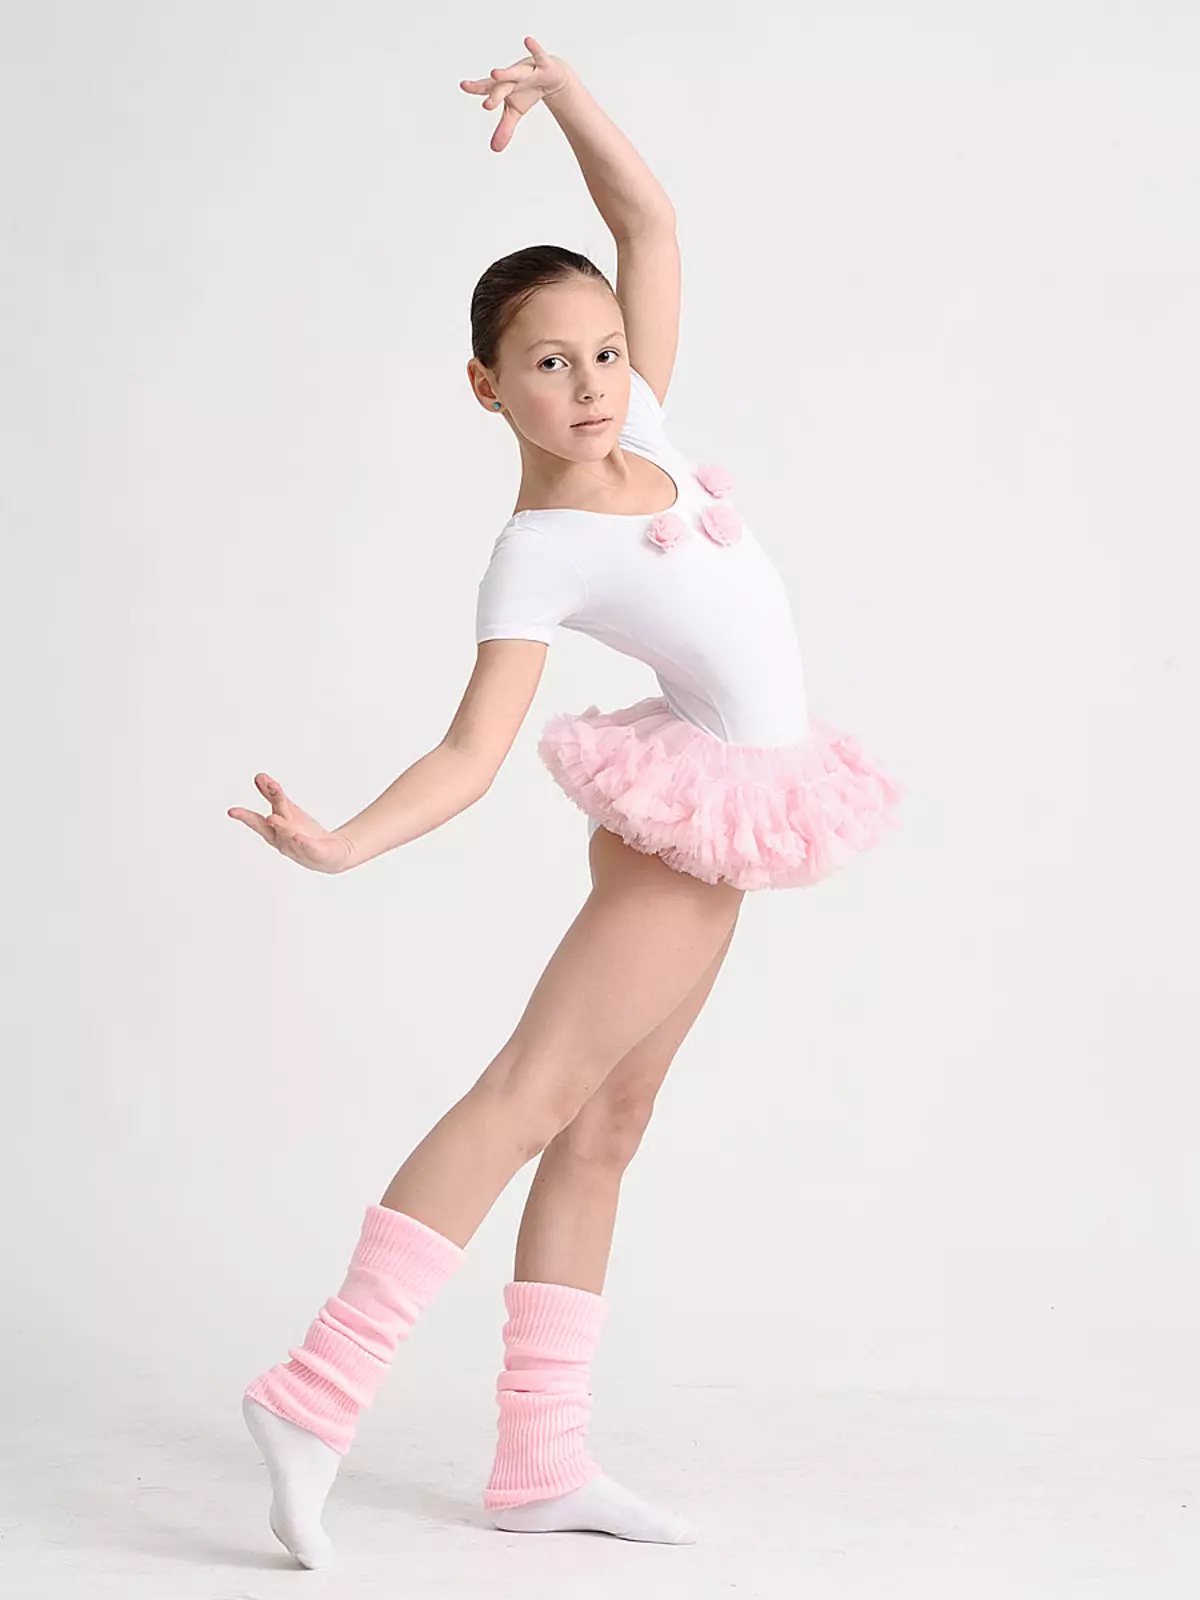 Children's swimsuit for dancing with skirt (45 photos): Dance models for girls 13495_2